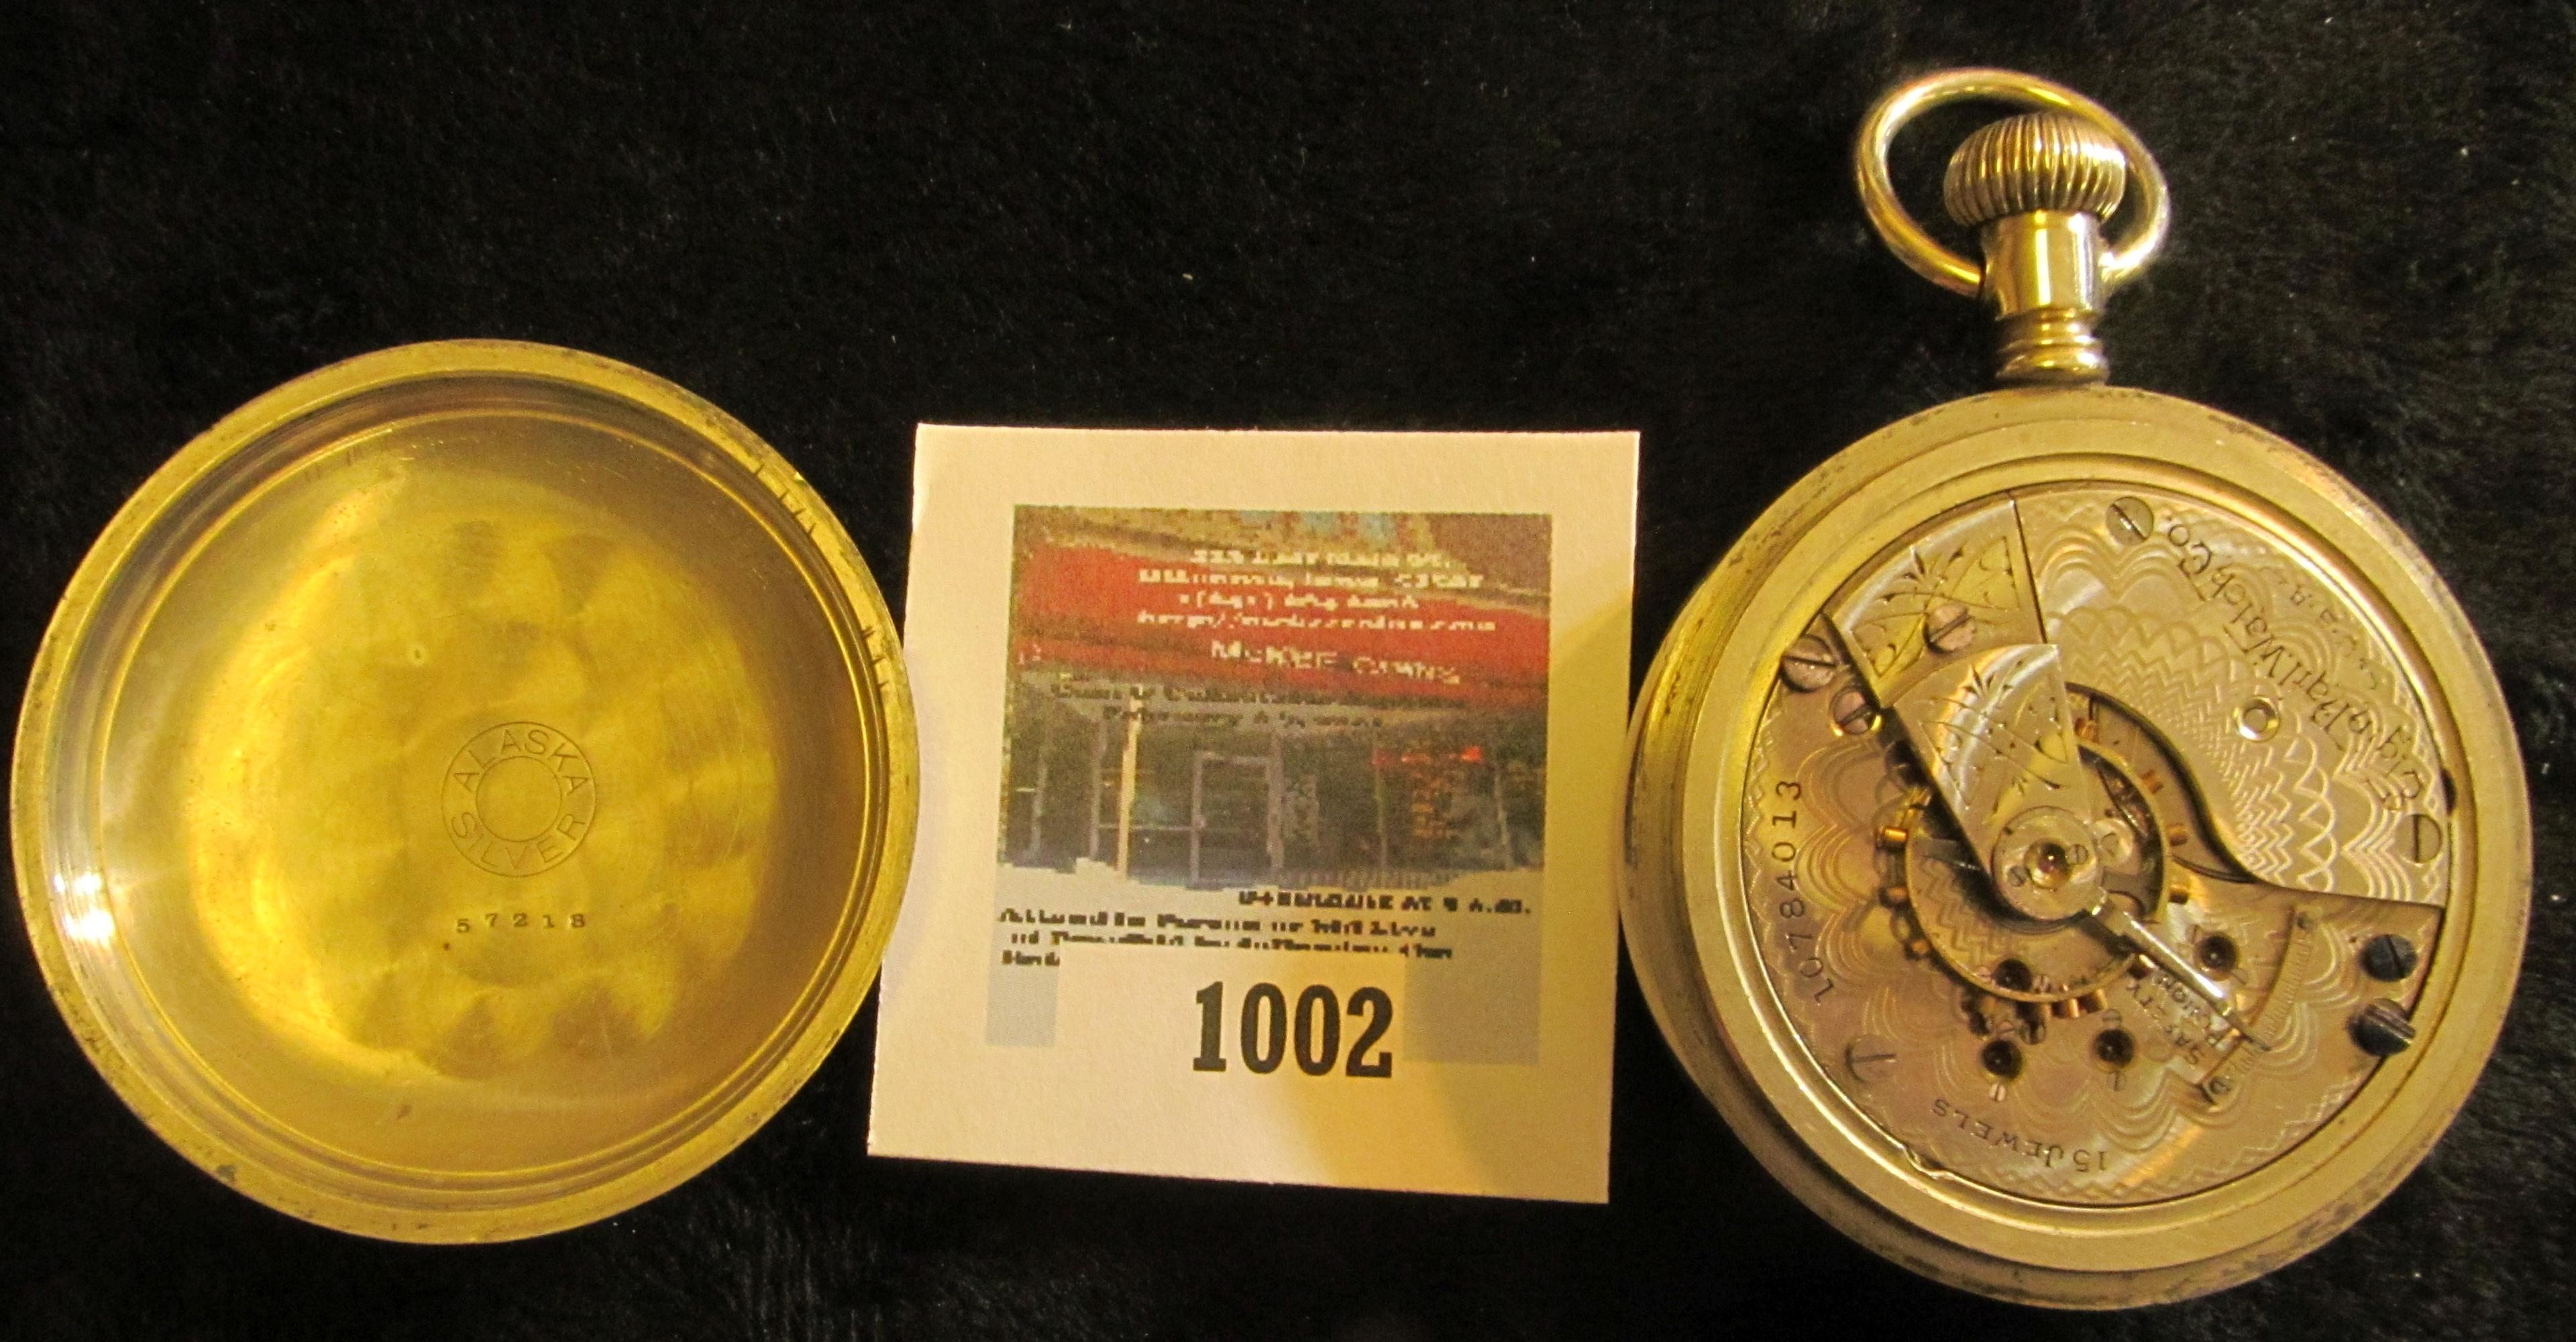 Elgin 15 jewel pocket watch, size 18s, s/n on works 10784013, production date 1904, has a locomotive